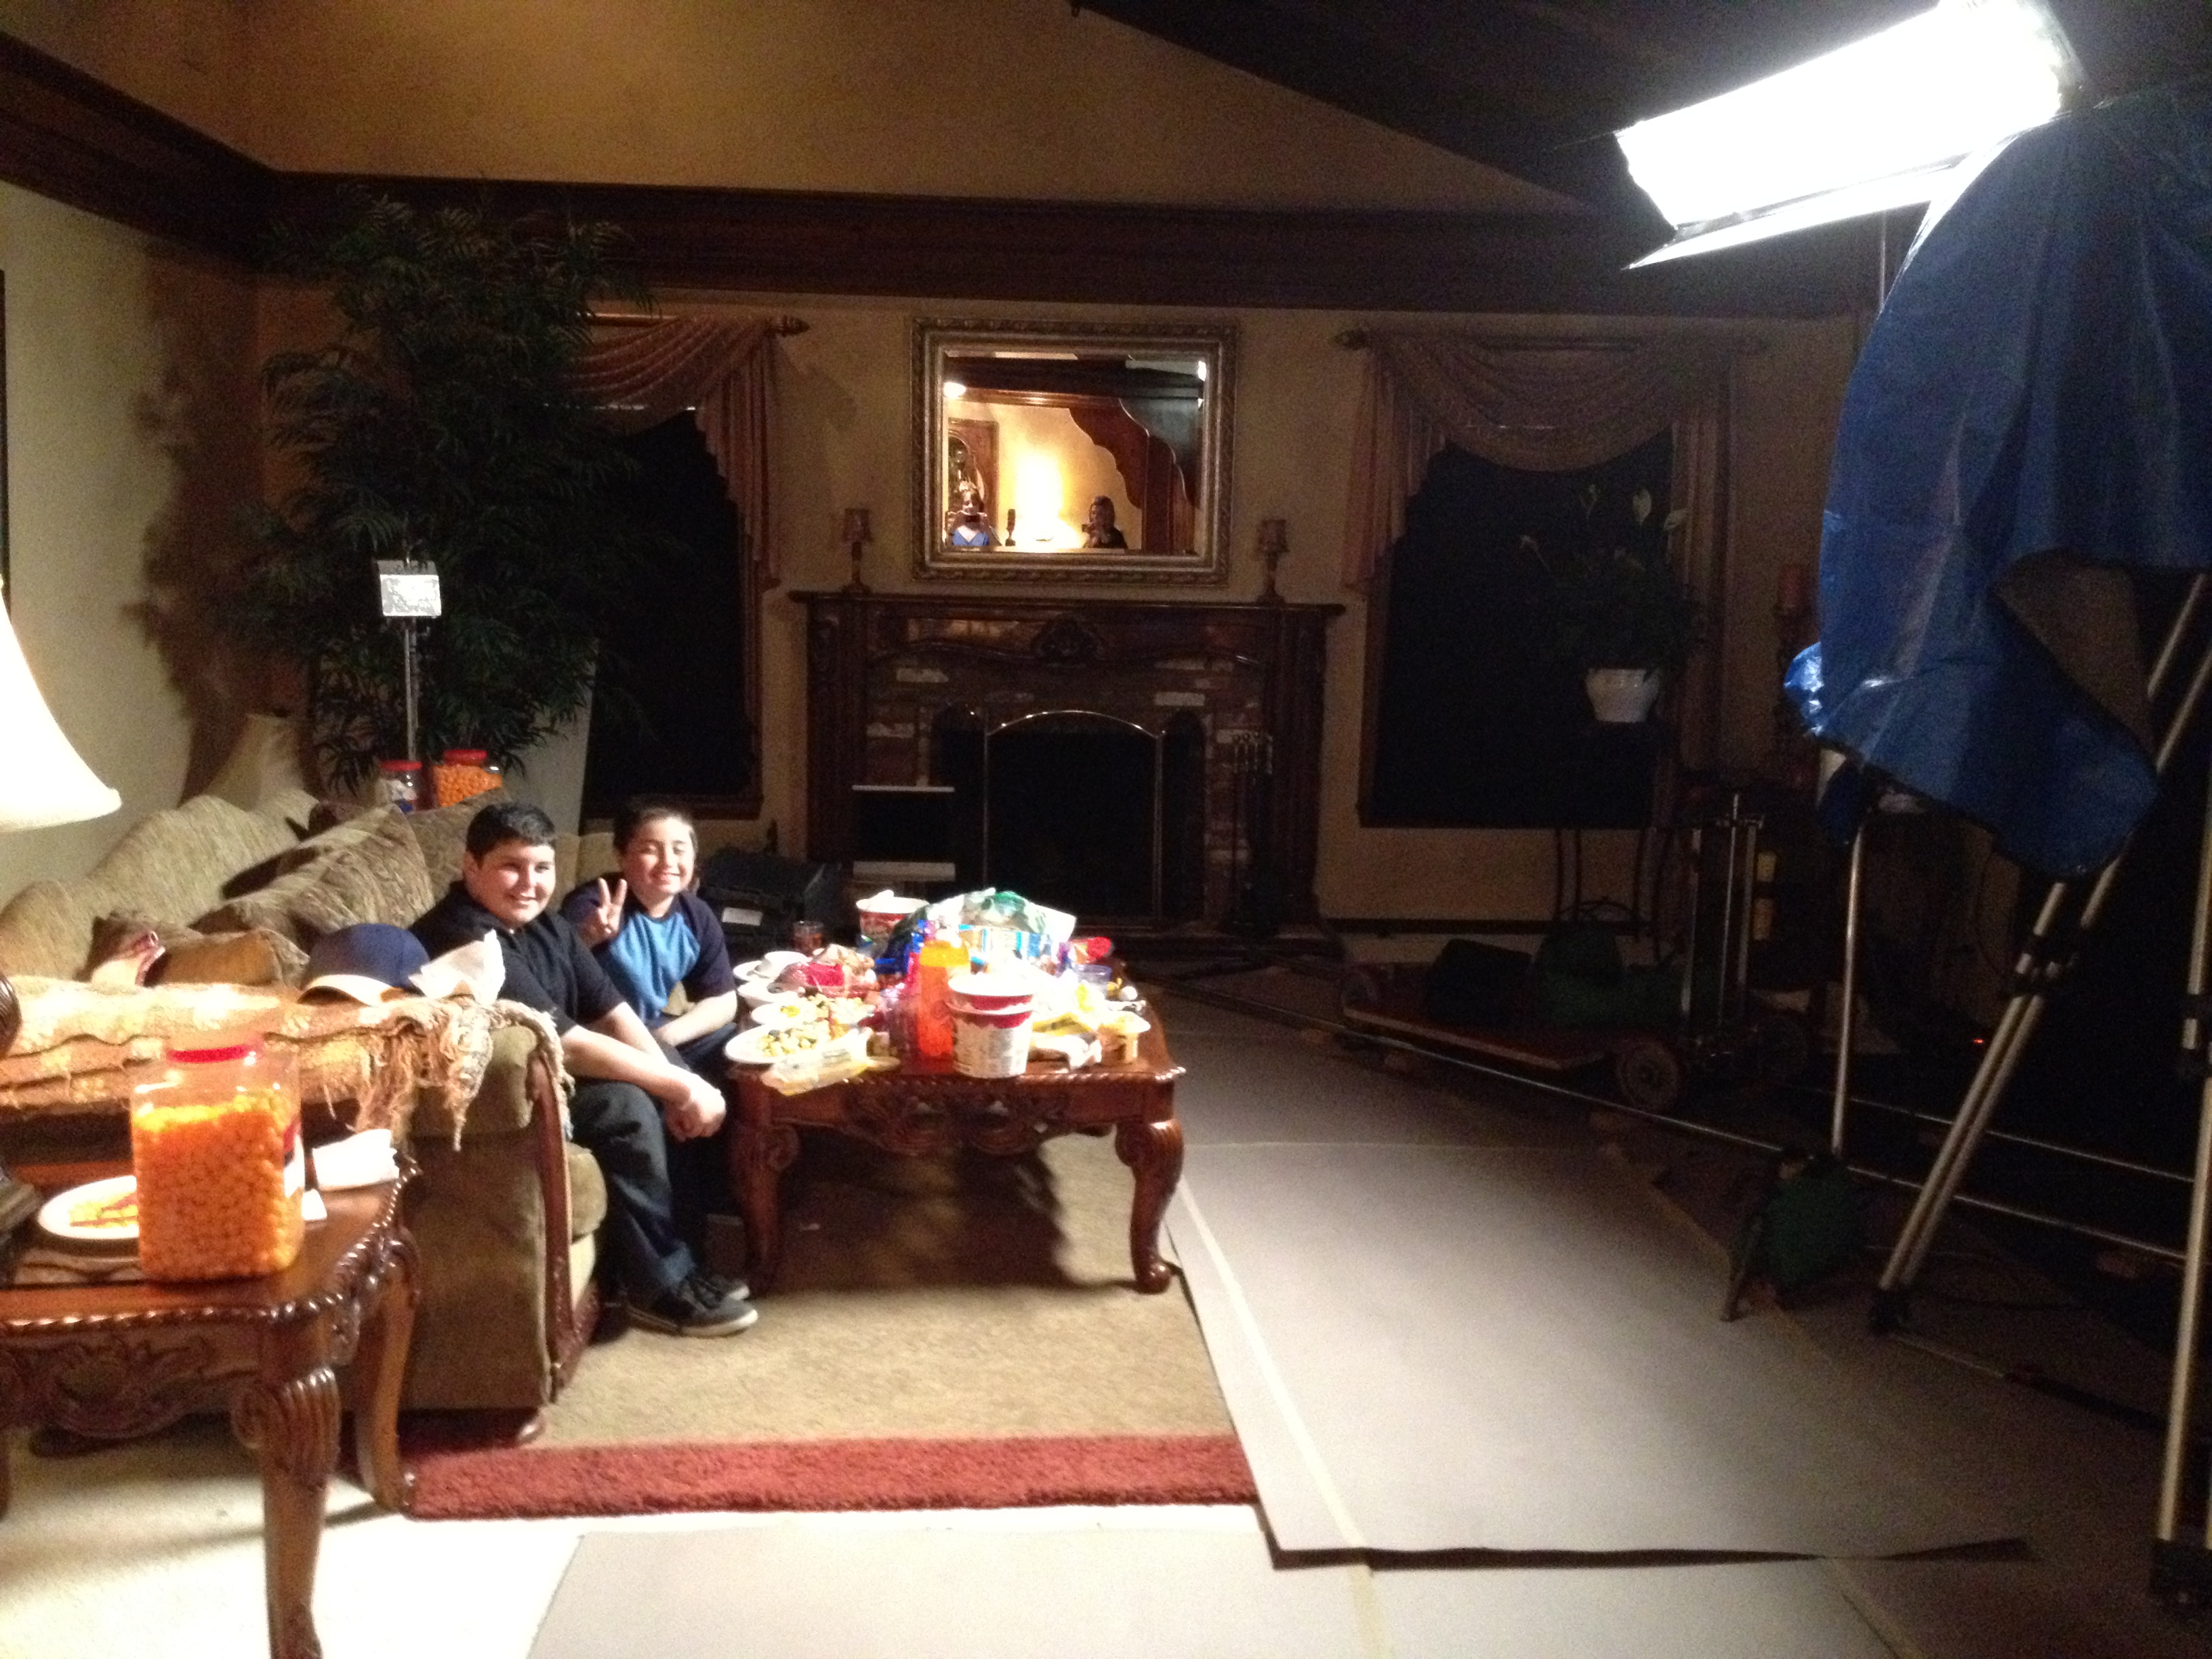 Christian filming as featured boy on Worlds of Warcraft III with William Shatner. He played Shatner's grandson.